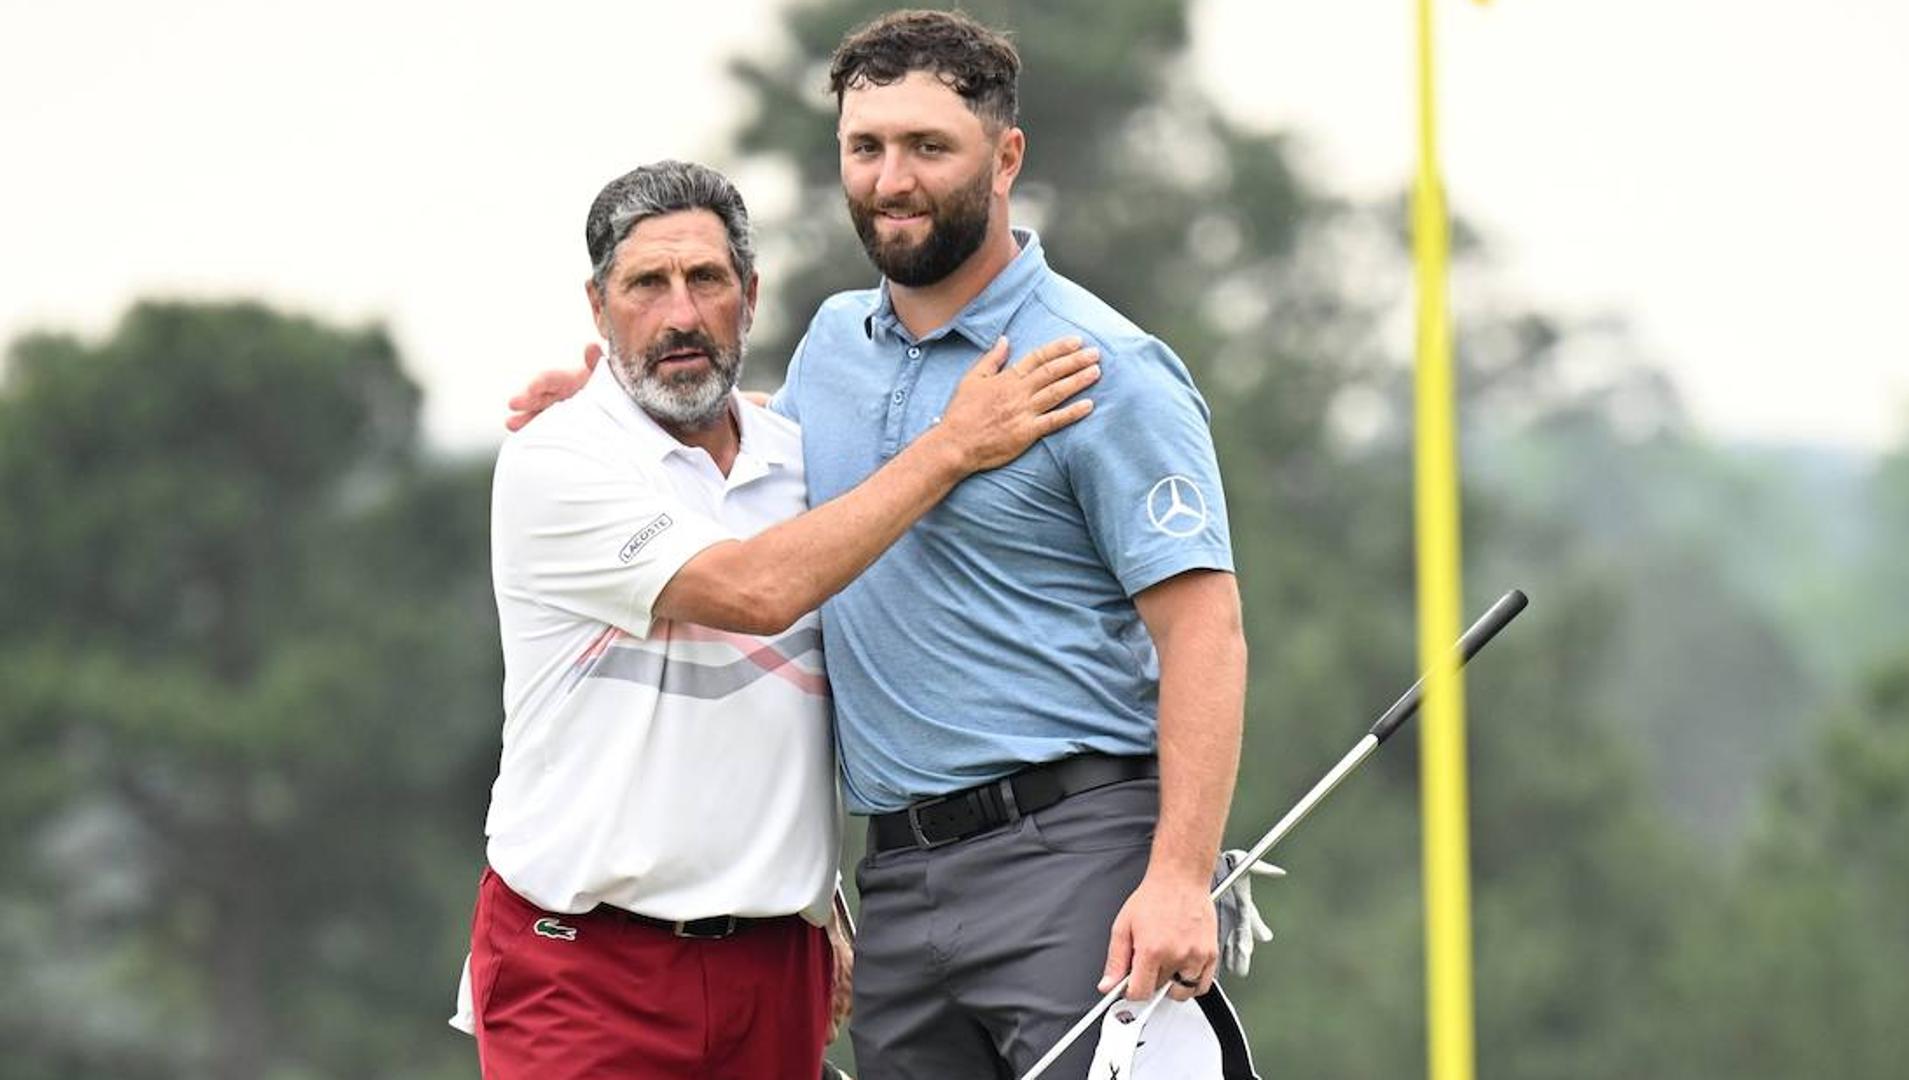 Olazabal, with +10, says goodbye to the Augusta Masters